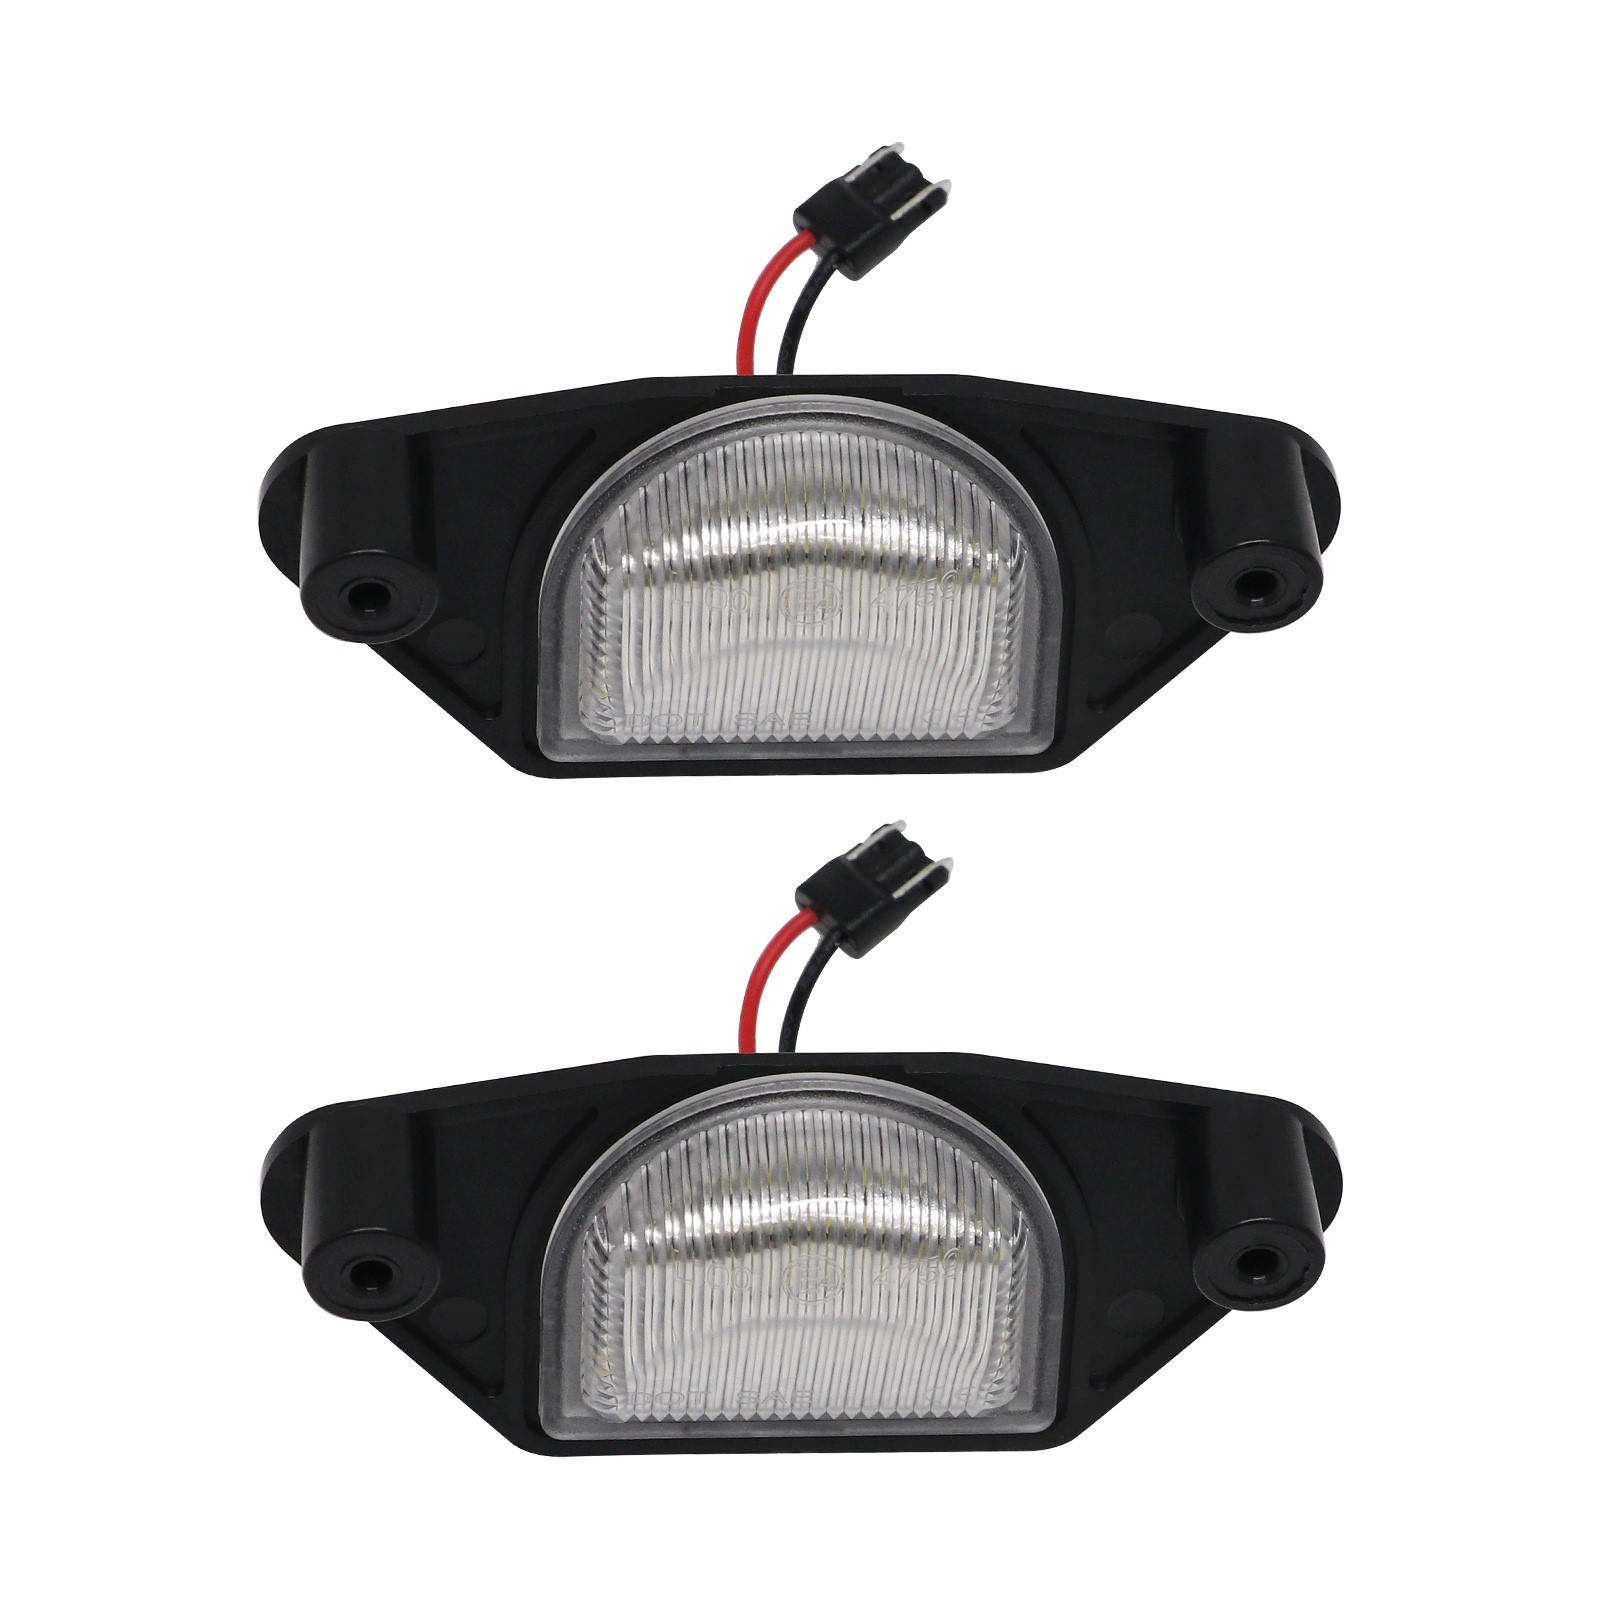 1984-2013 Chevrolet Corvette Ultra Bright LED License Plate Light Assembly - Auto Accessories Of America